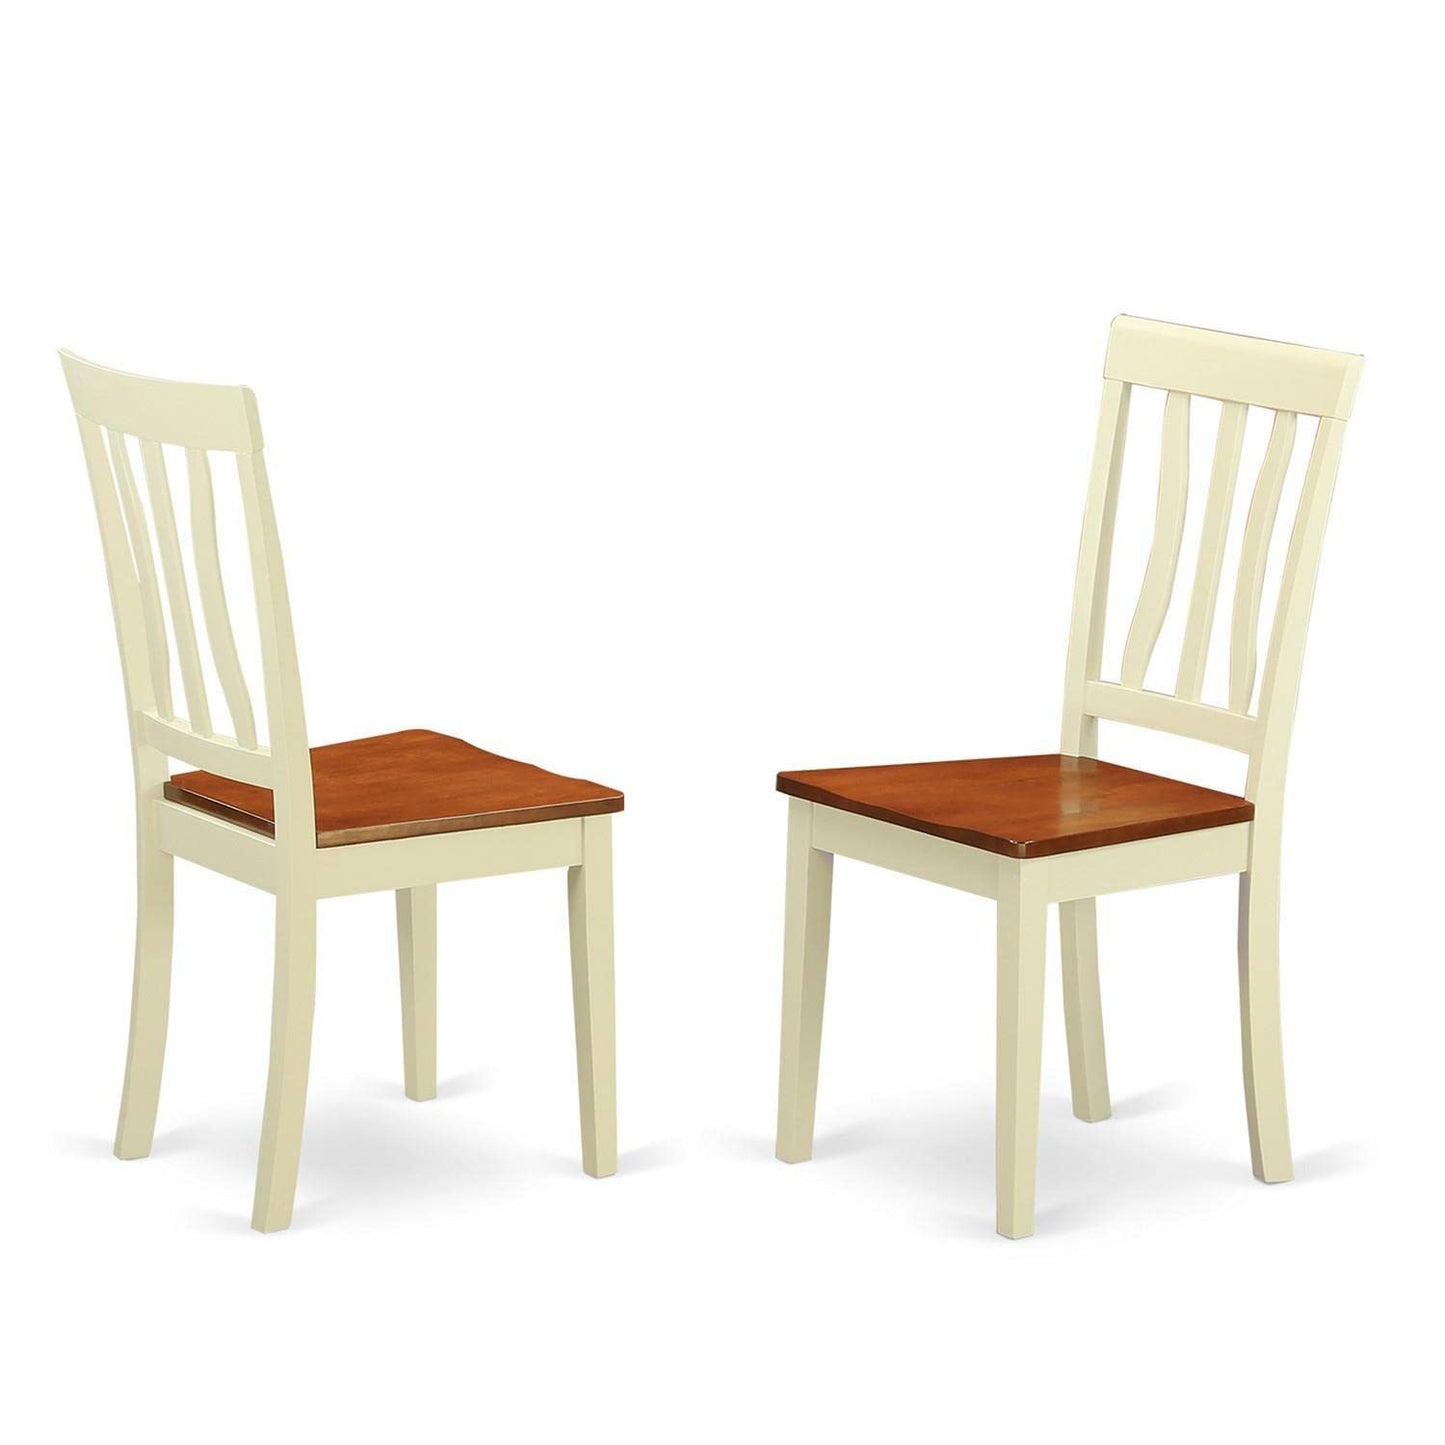 East West Furniture Antique Dining Room Slat Back Solid Wood Seat Chairs, Set of 2, Buttermilk & Cherry